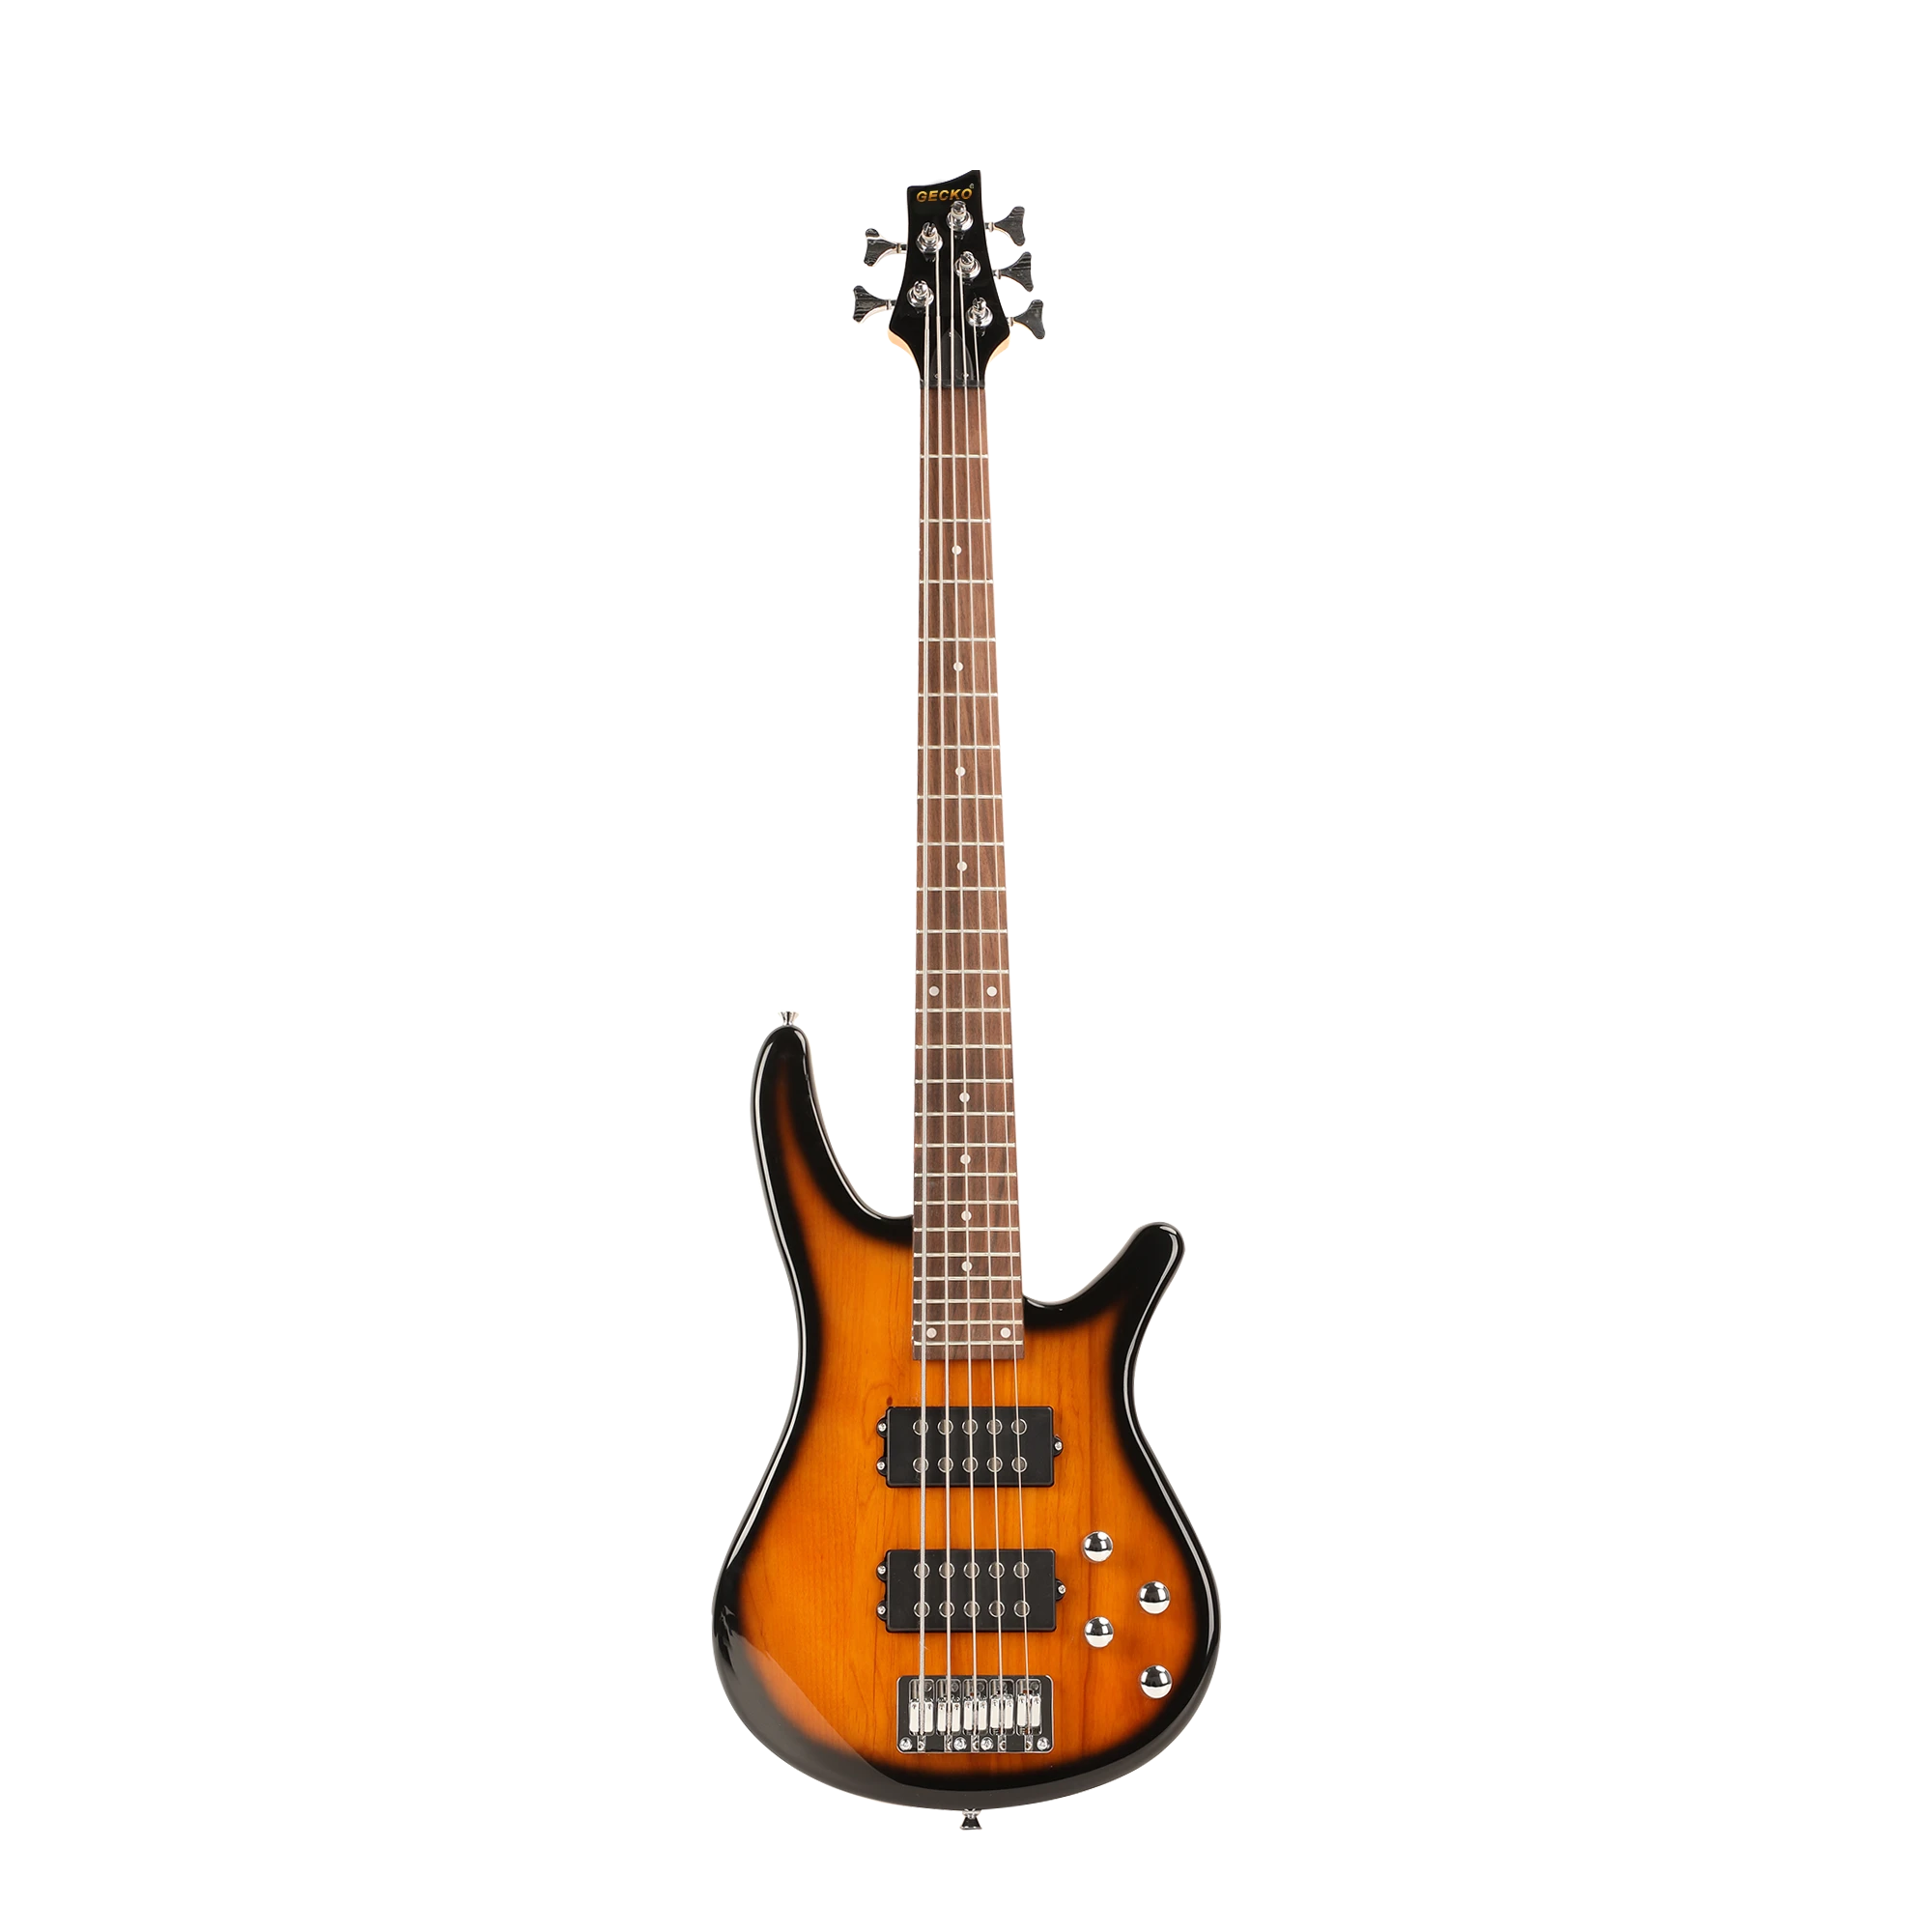 Customizable Chinese gecko professional factory best selling electric bass